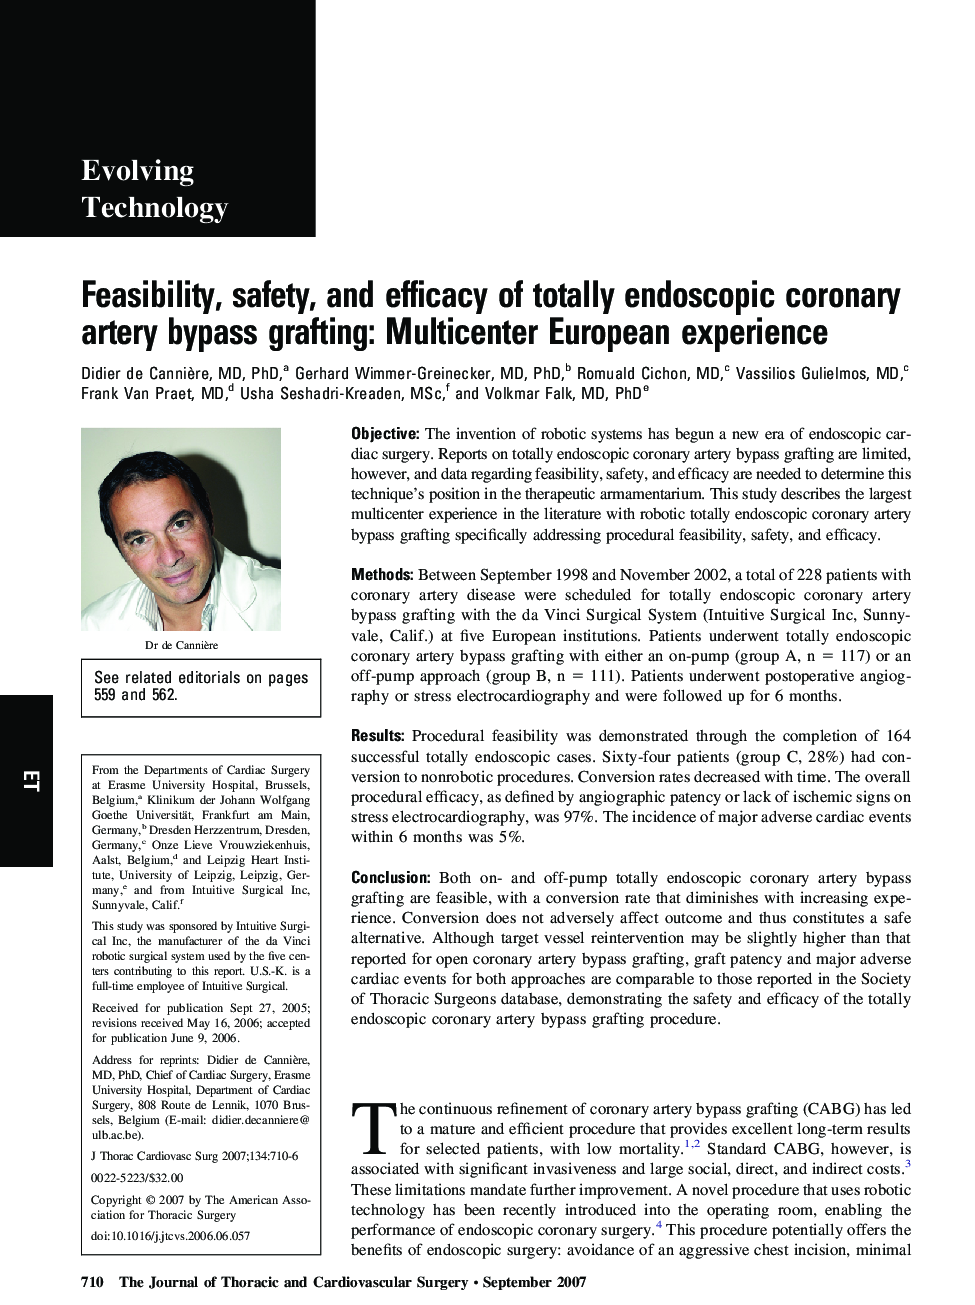 Feasibility, safety, and efficacy of totally endoscopic coronary artery bypass grafting: Multicenter European experience 